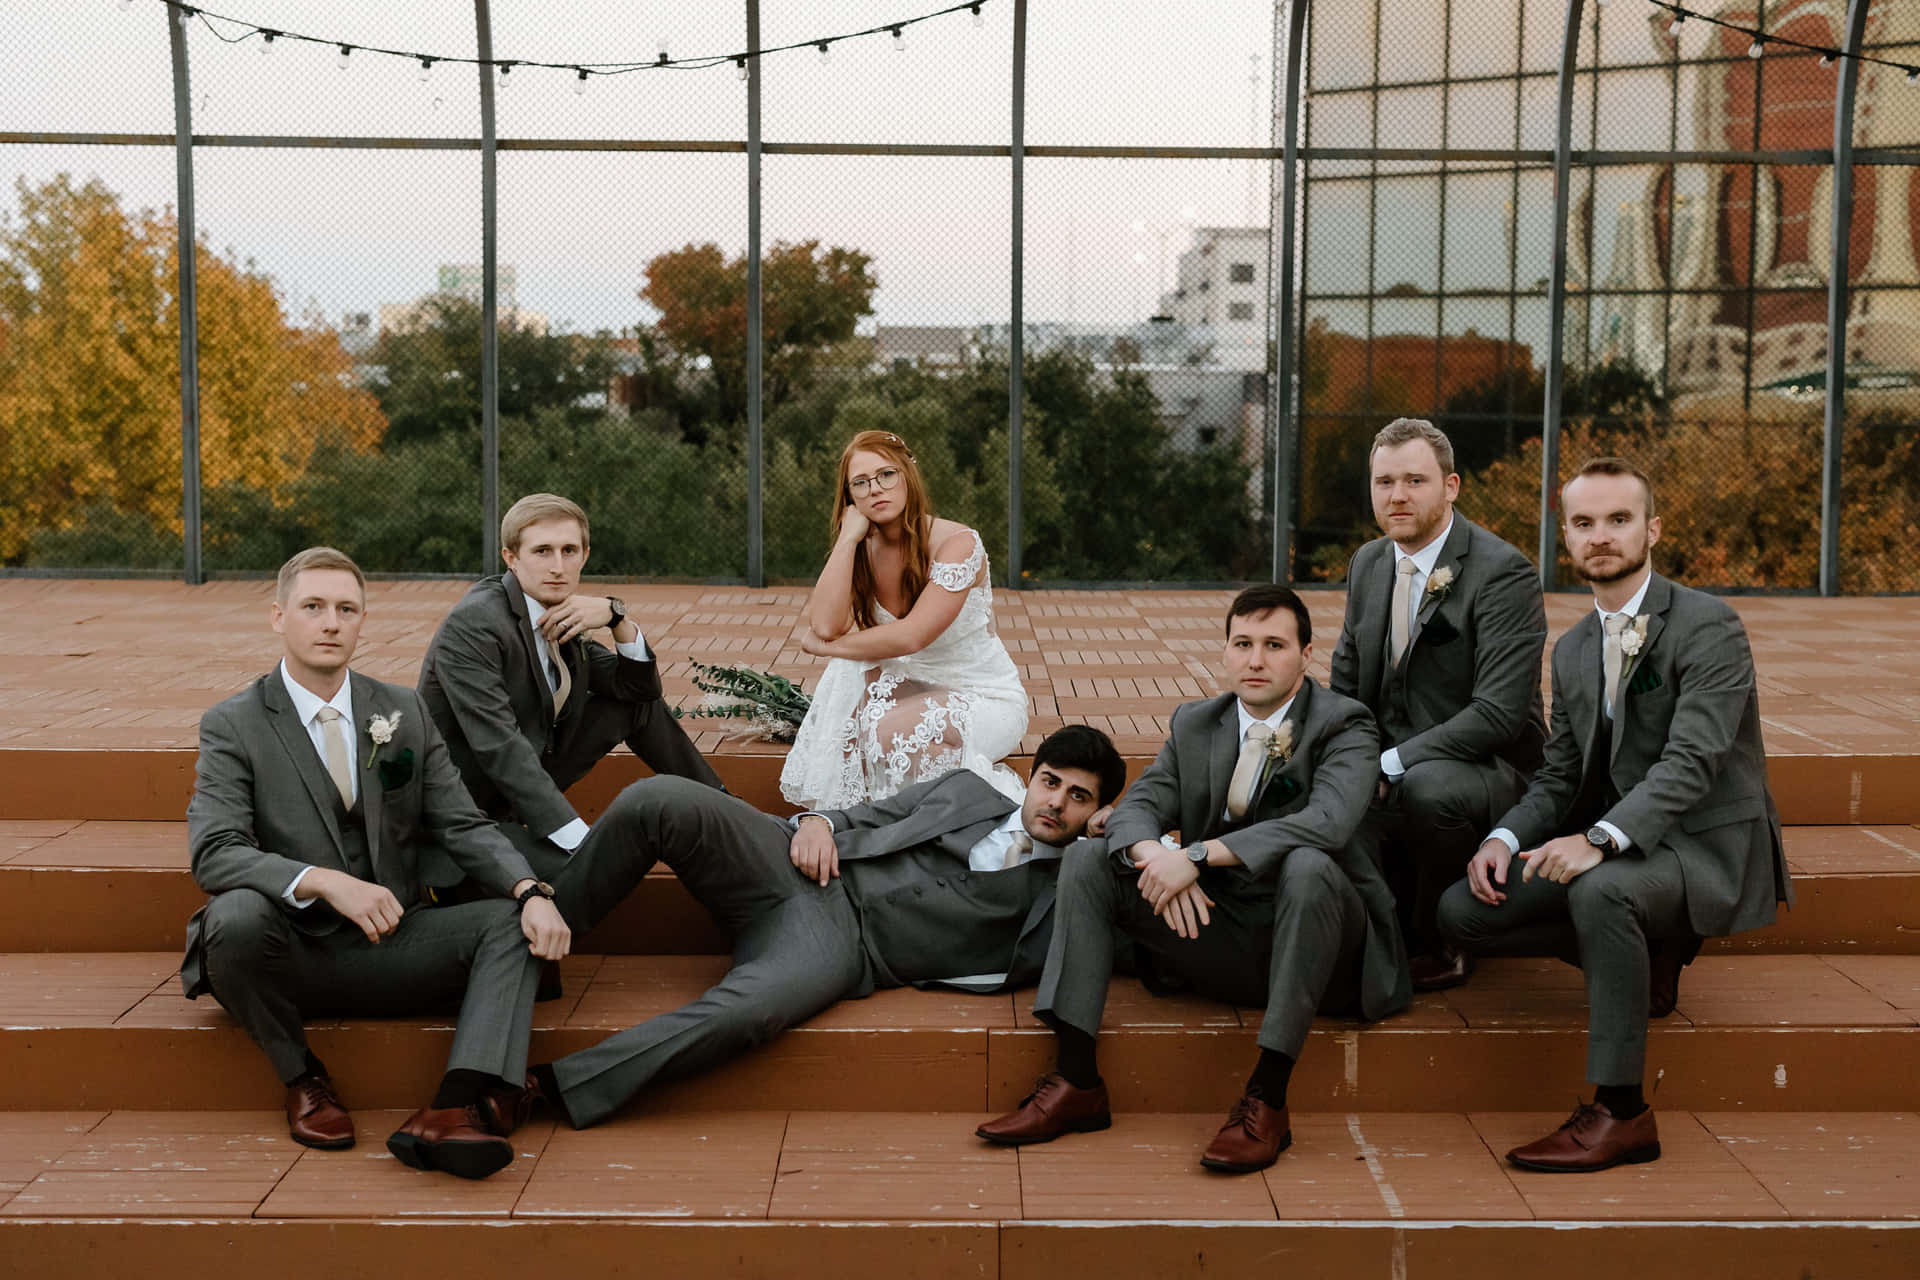 Cheers! Celebrate with your groomsmen on your special day!